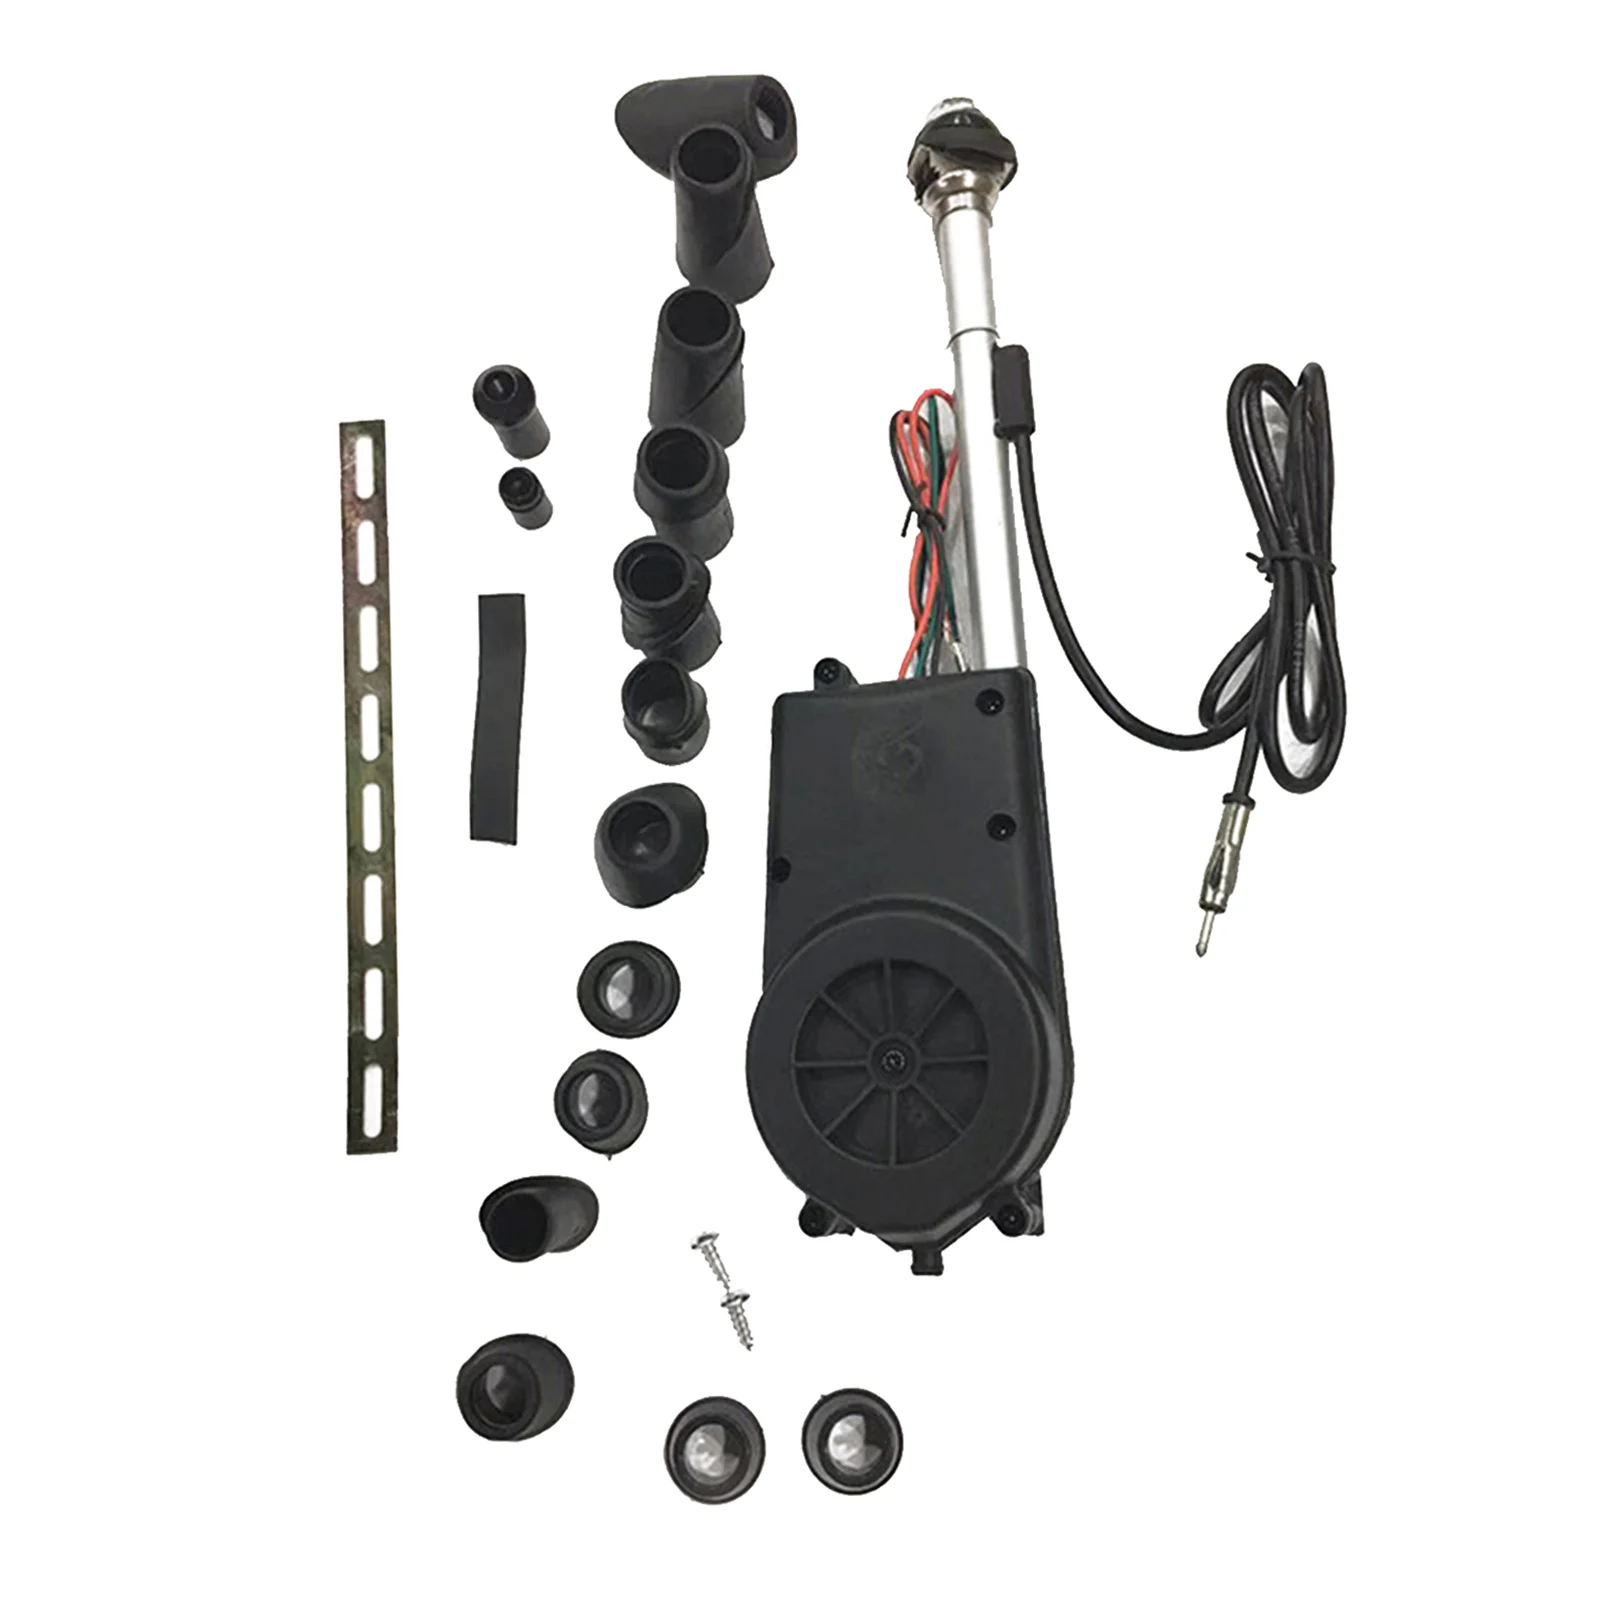 12V Car Electric Power Automatic Antenna Aerial Assembly Kit for AM/FM Radio, Powerful